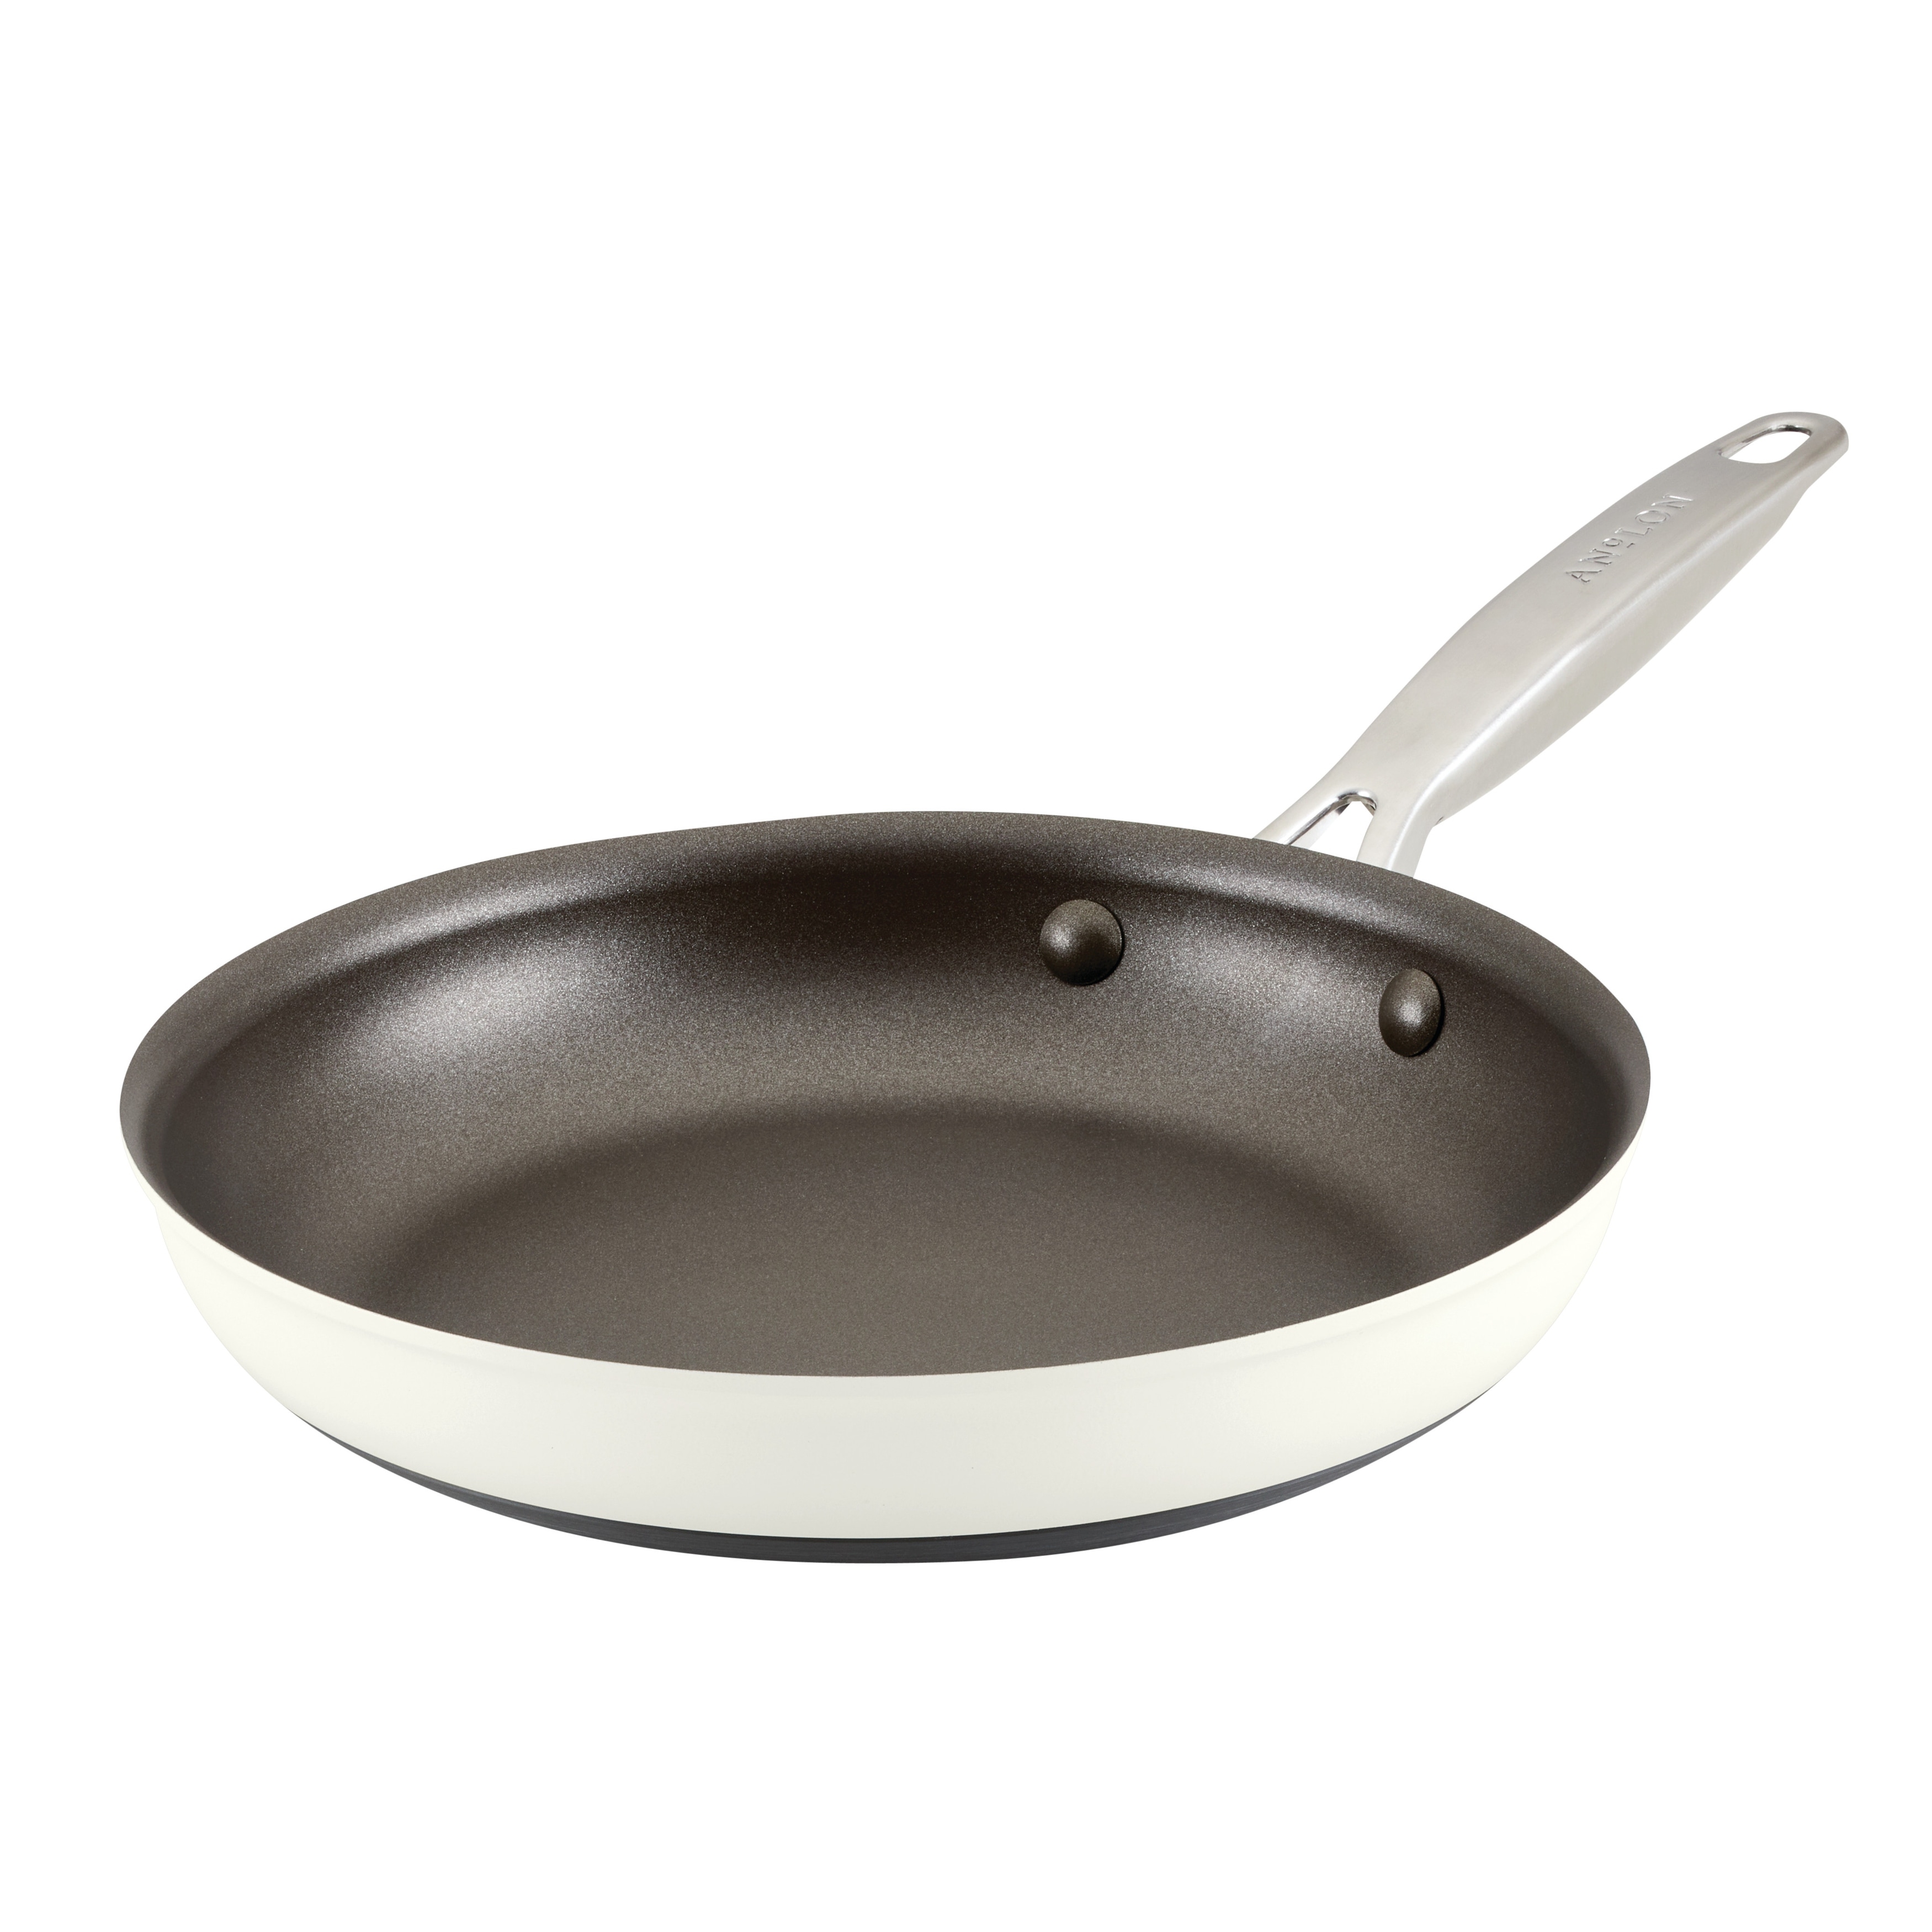 Anolon Advanced 12 Hard-Anodized Nonstick Covered Ultimate Pan